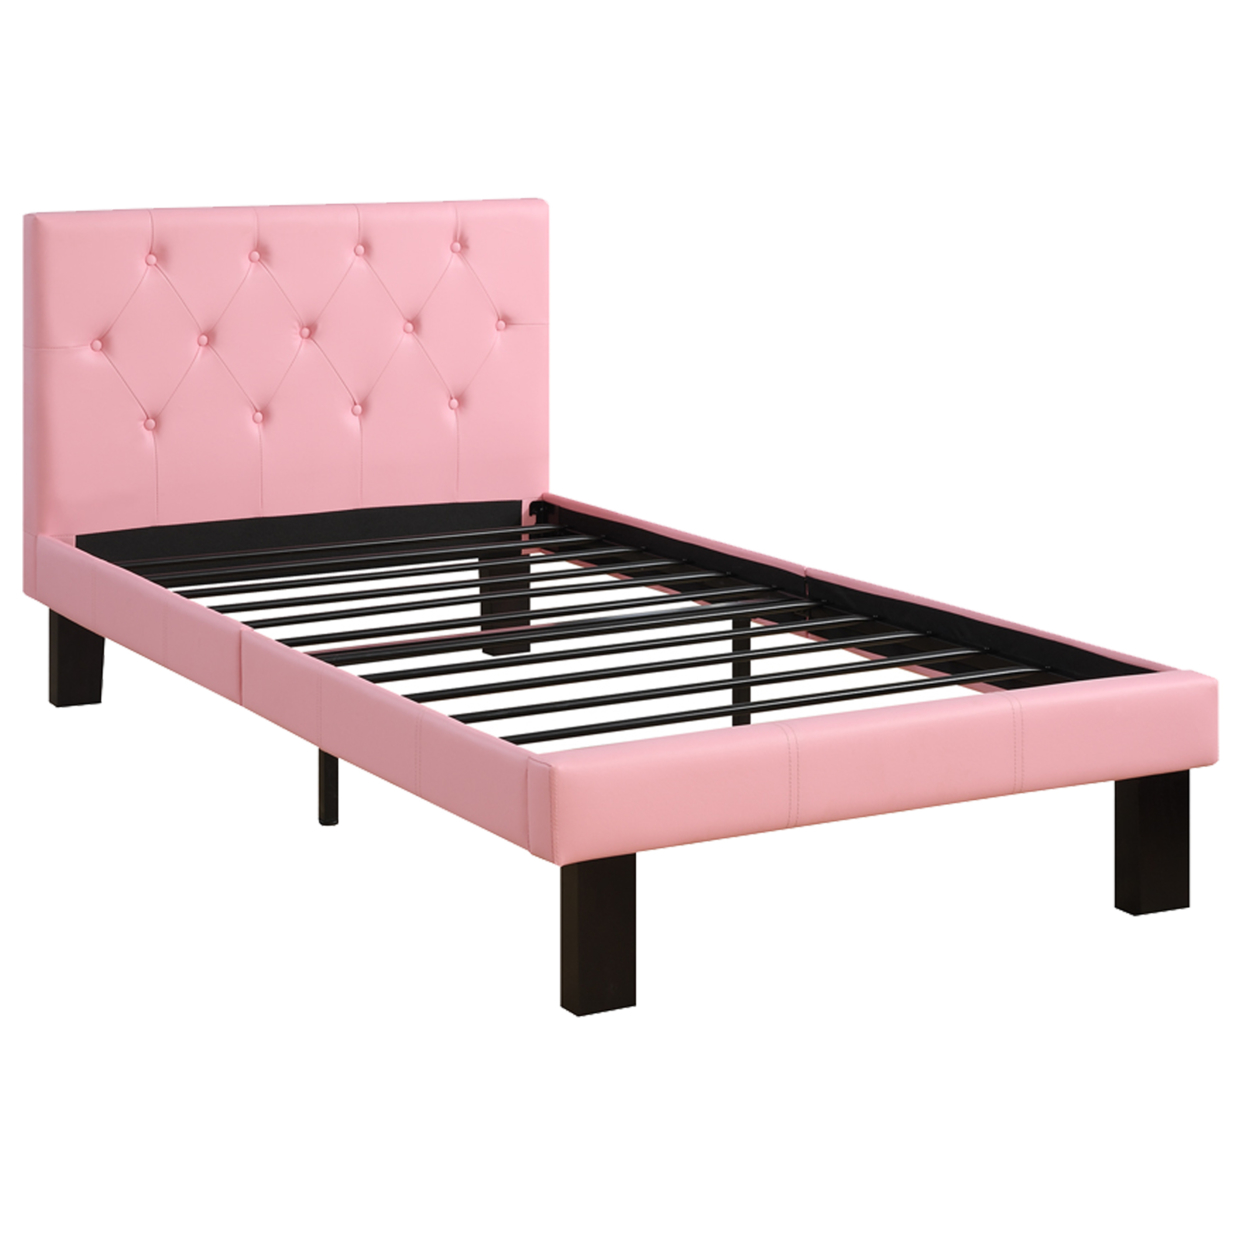 Faux Leather Upholstered Full Size Bed With Tufted Headboard Pink- Saltoro Sherpi